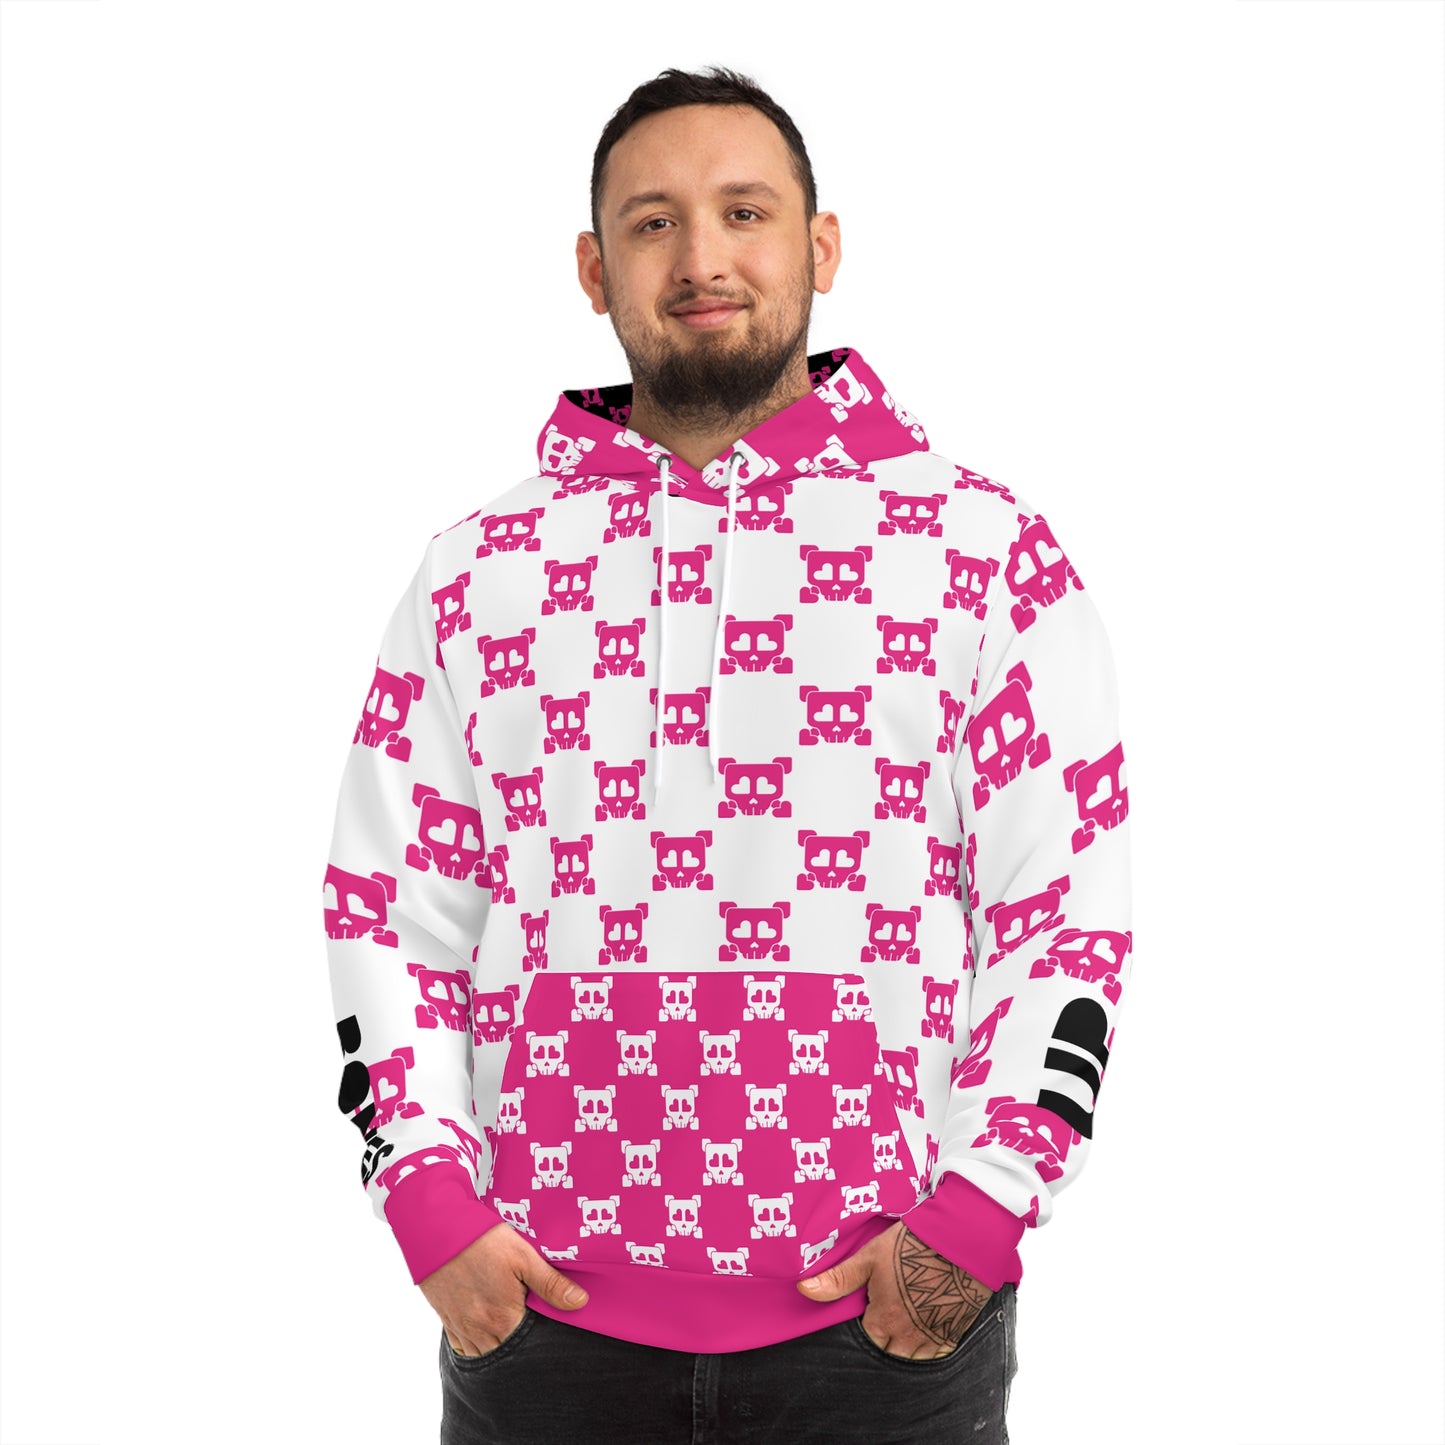 B-Side Bones Up Hoodie - White and Pink v1